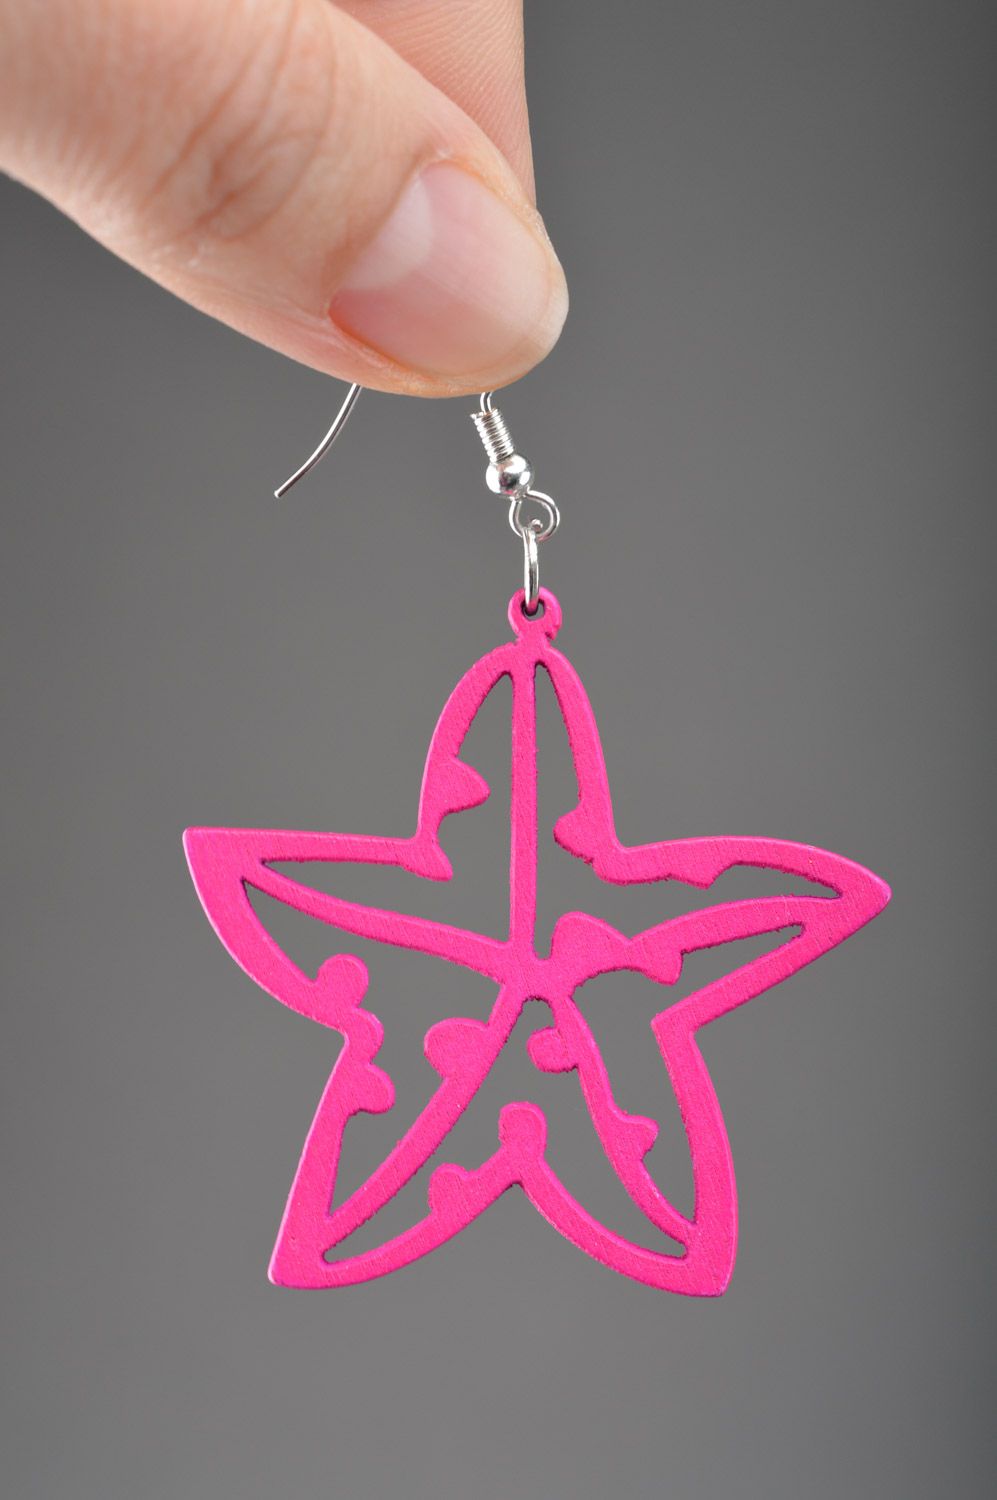 Handmade wooden dangle earrings in the shape of bright pink flowers for girls photo 3